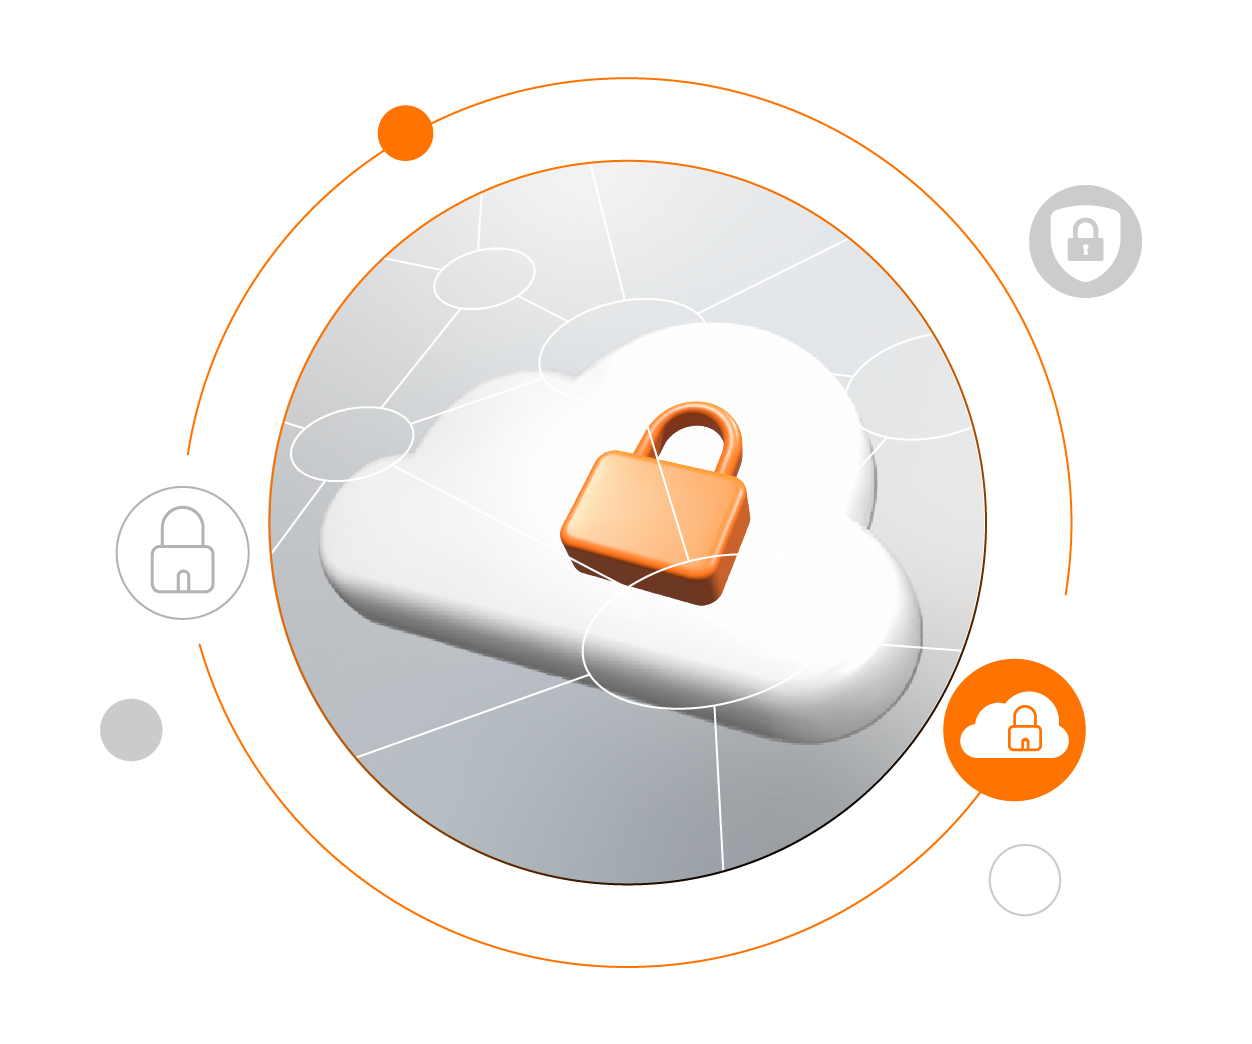 Accelerate your IAM project with WSO2 Private Identity Cloud